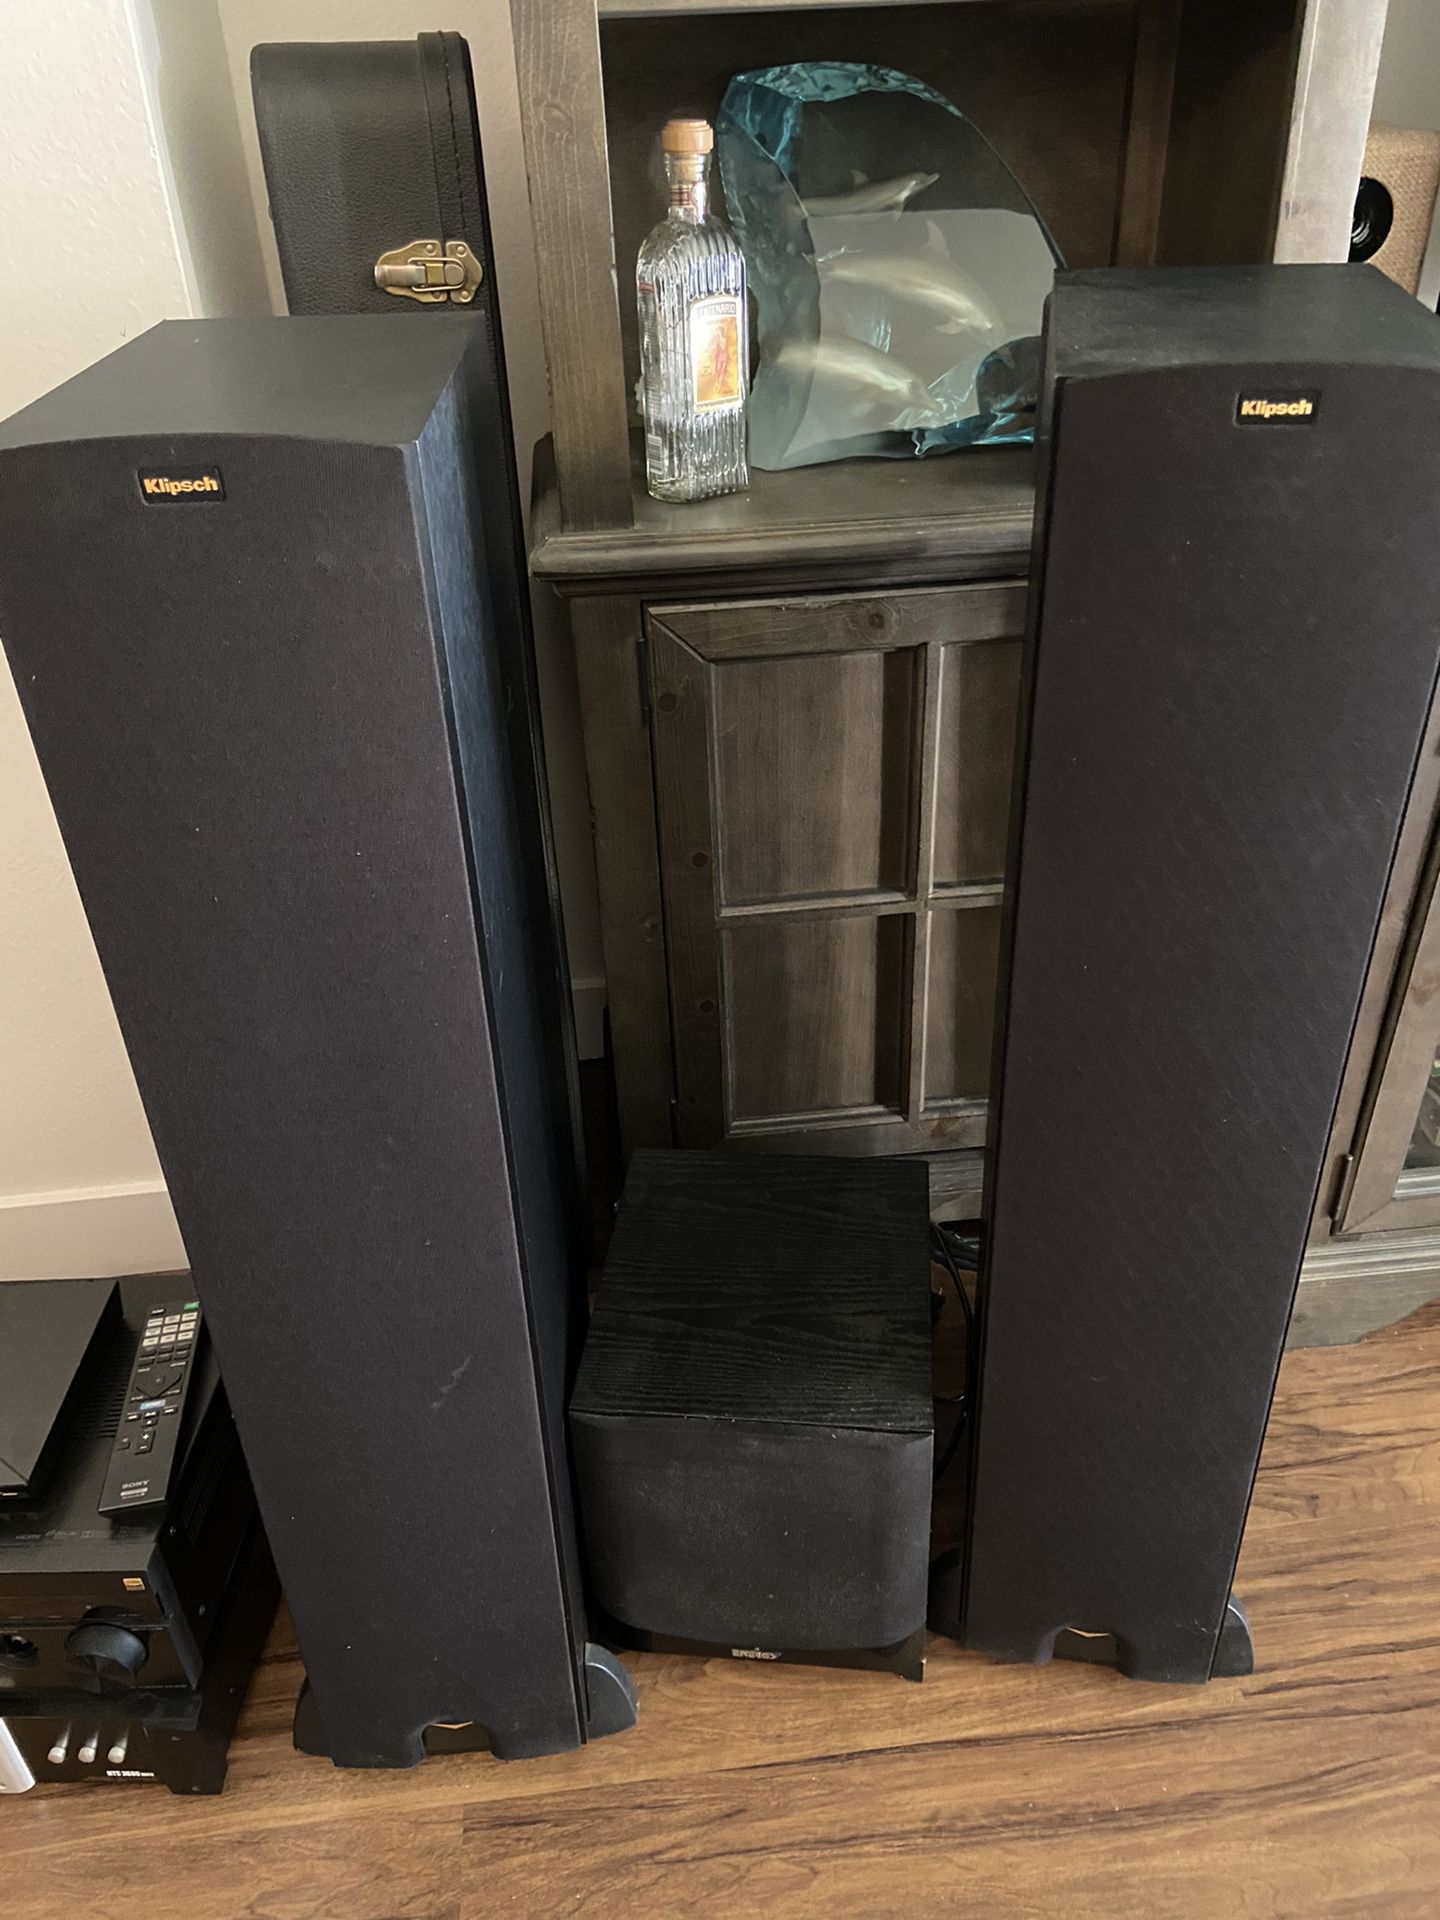 Klipsch Tower Speakers and Sub Woofer